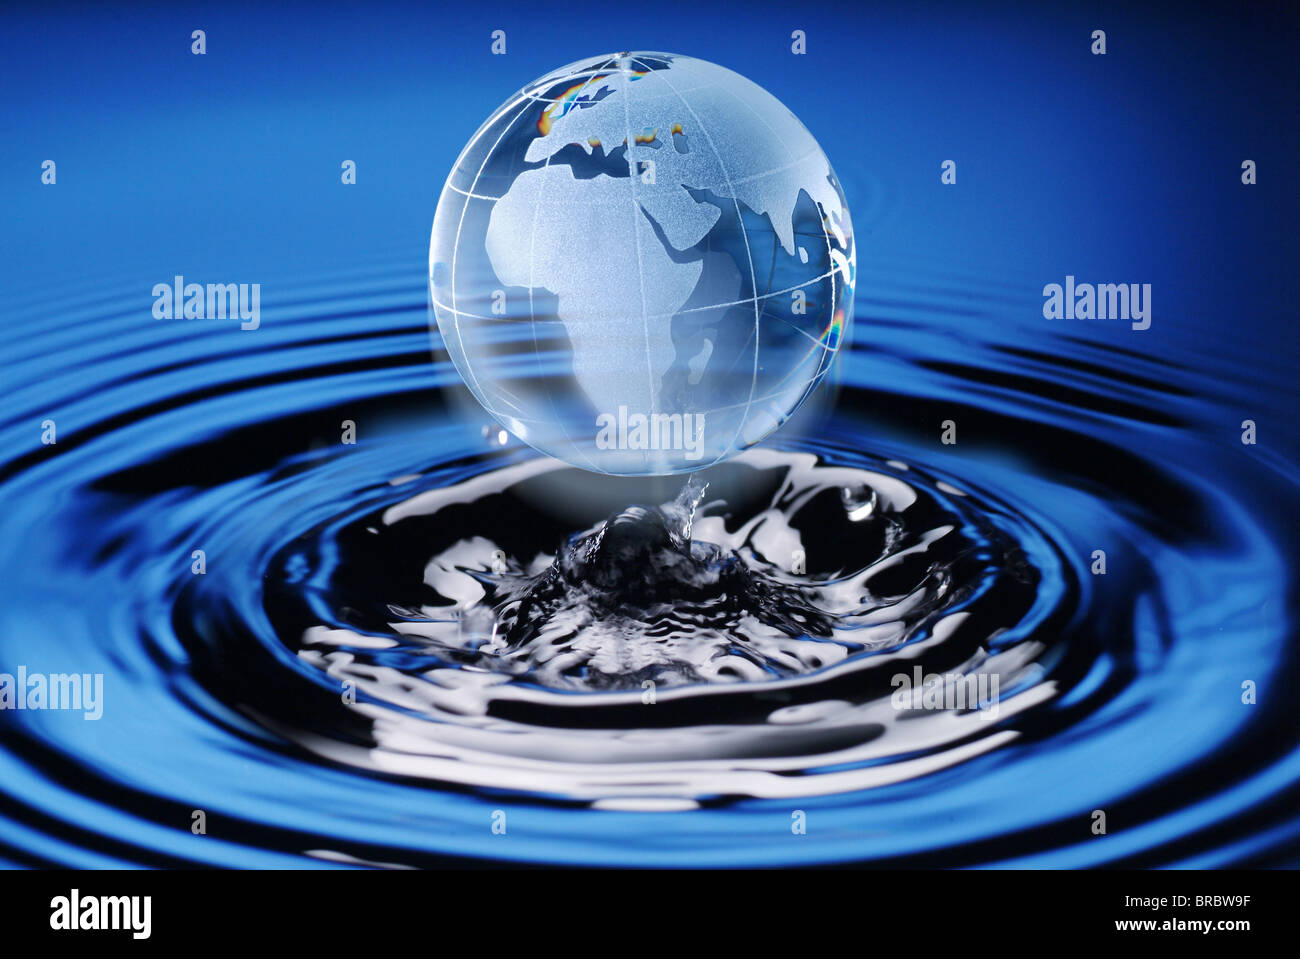 Glass globe emerging out of water Stock Photo